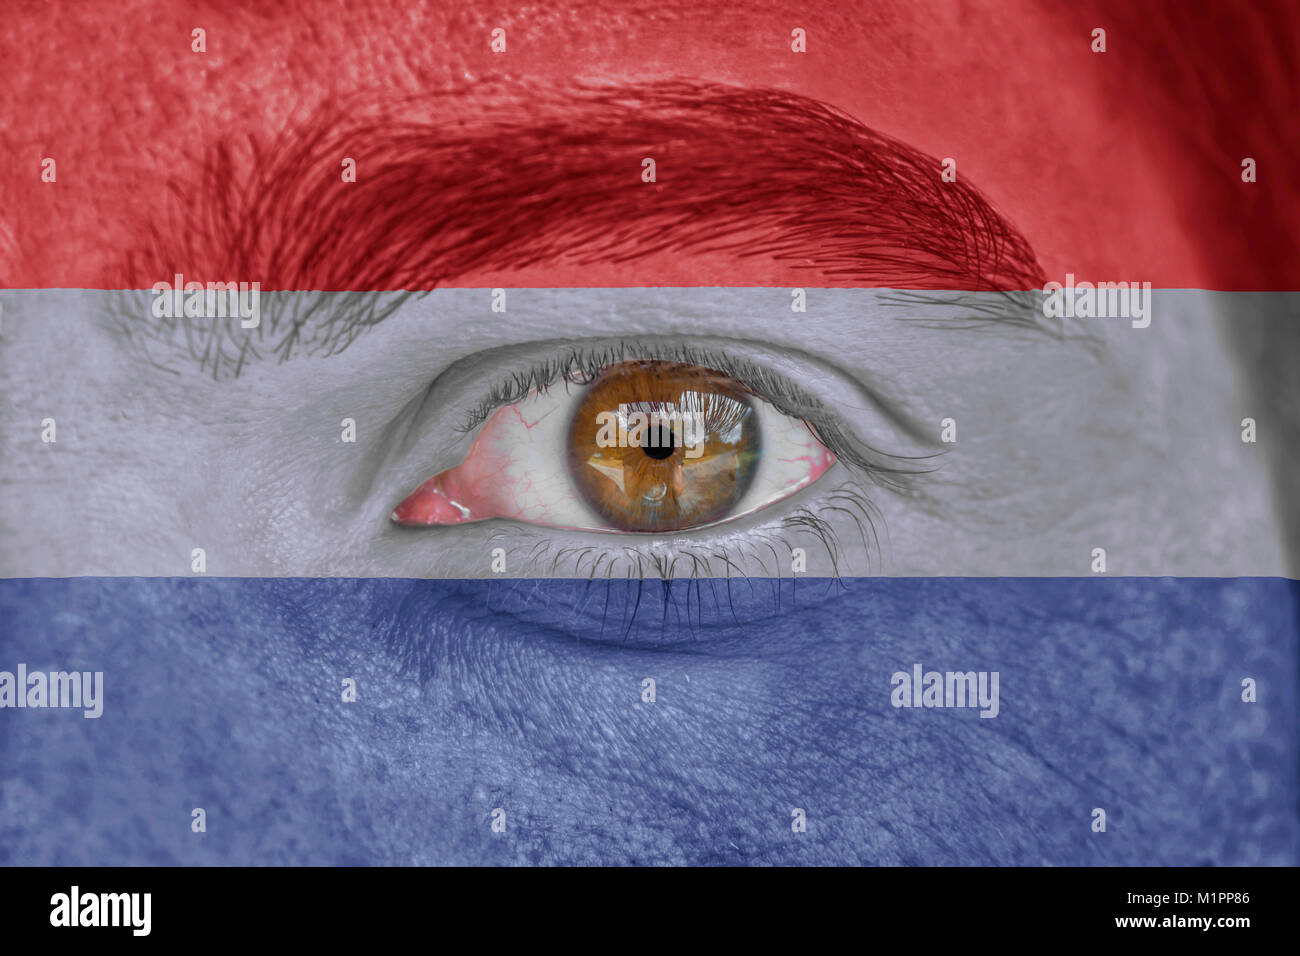 Human face and eye painted with flag of Netherlands Stock Photo